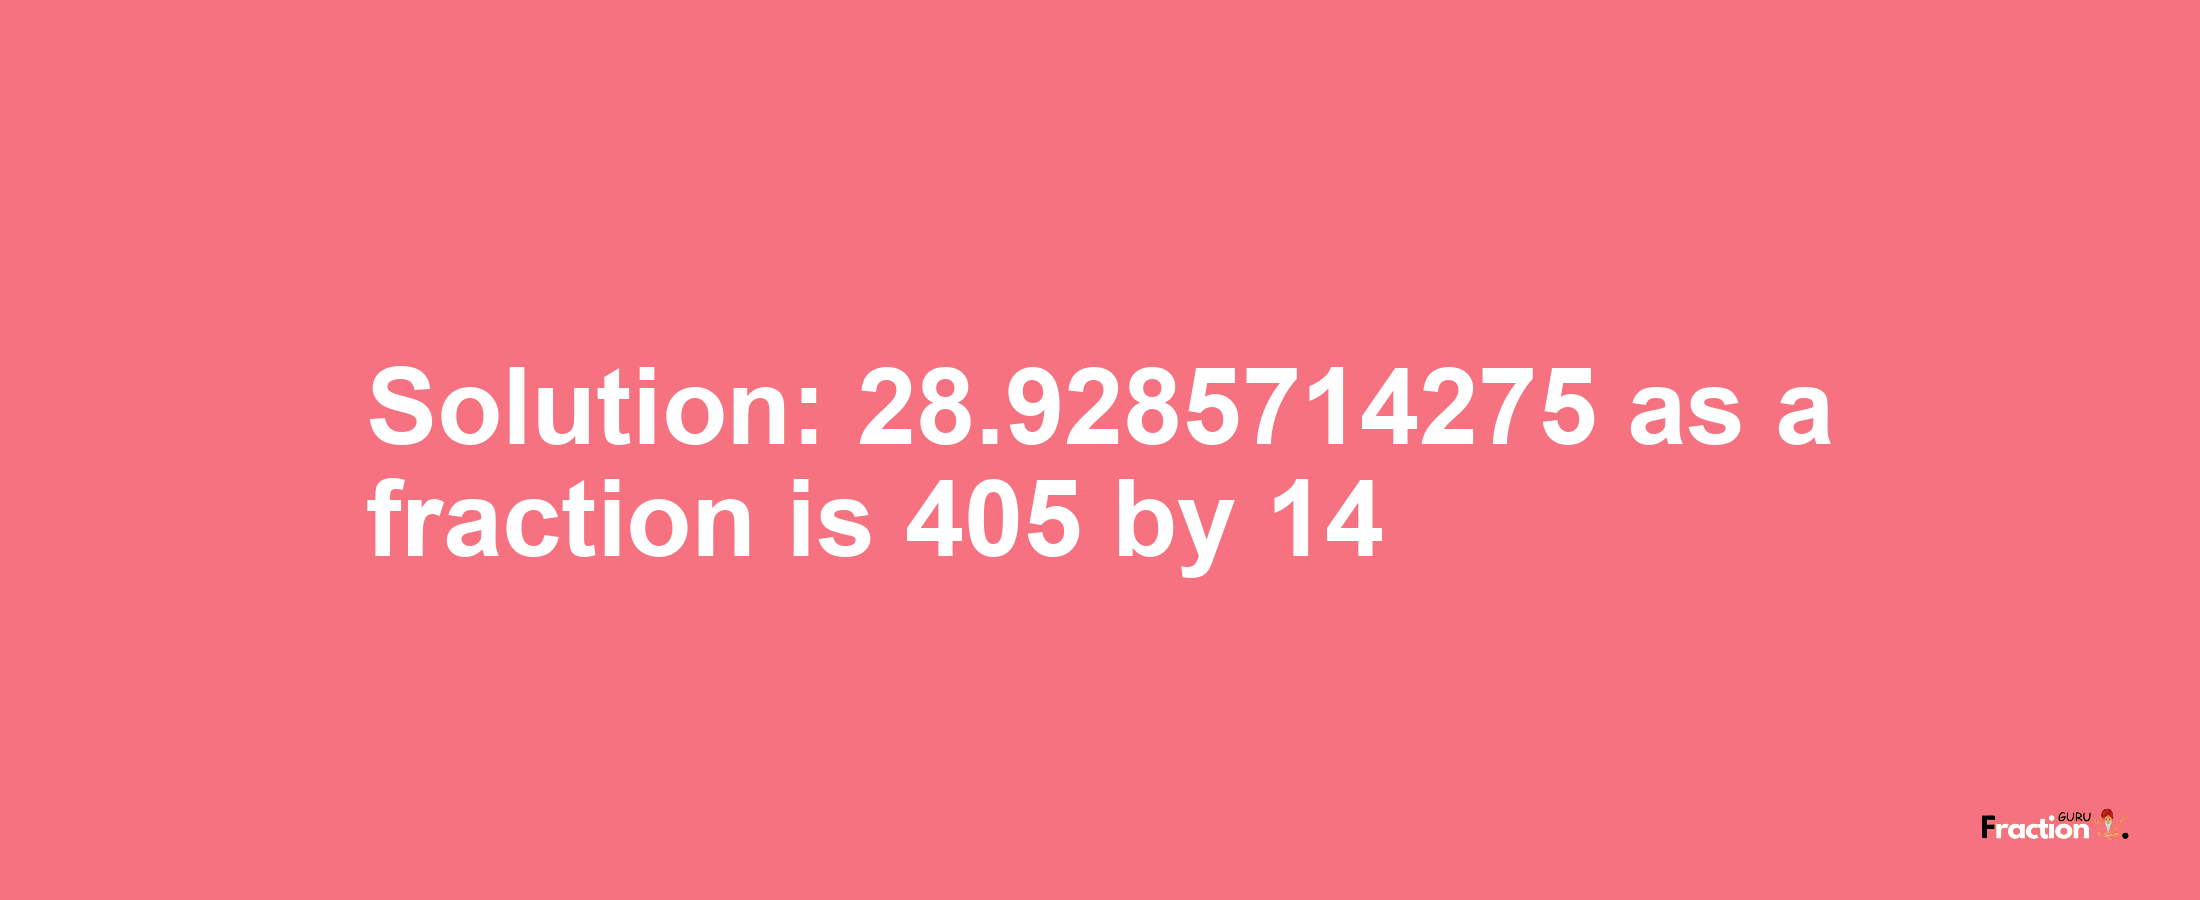 Solution:28.9285714275 as a fraction is 405/14